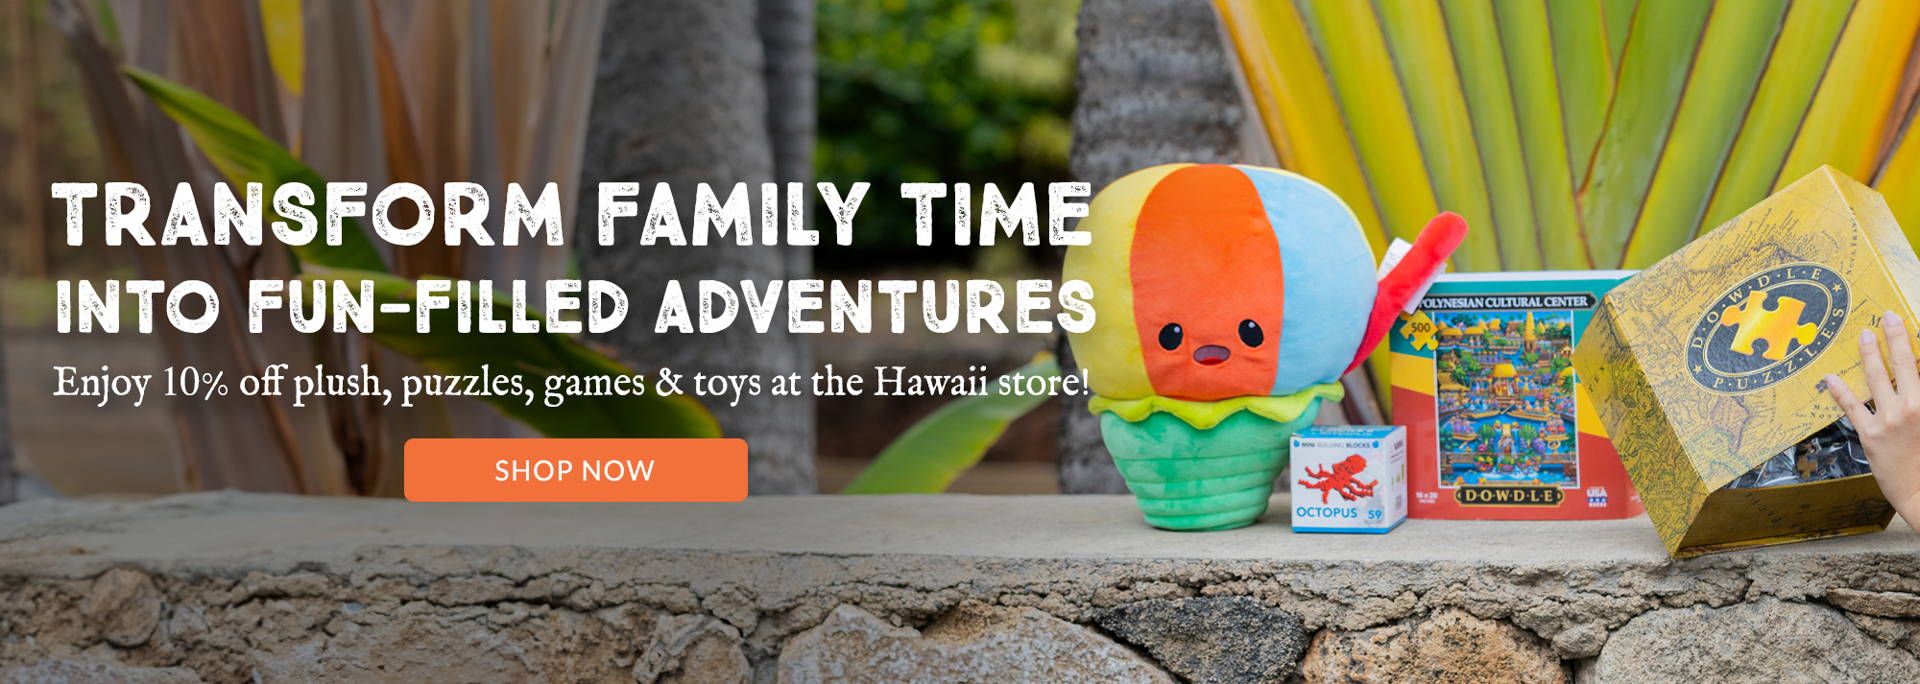 Transform family time into fun-filled adventures with 10% off plush, puzzles, games & toys at the Hawaii store – where island joy awaits!